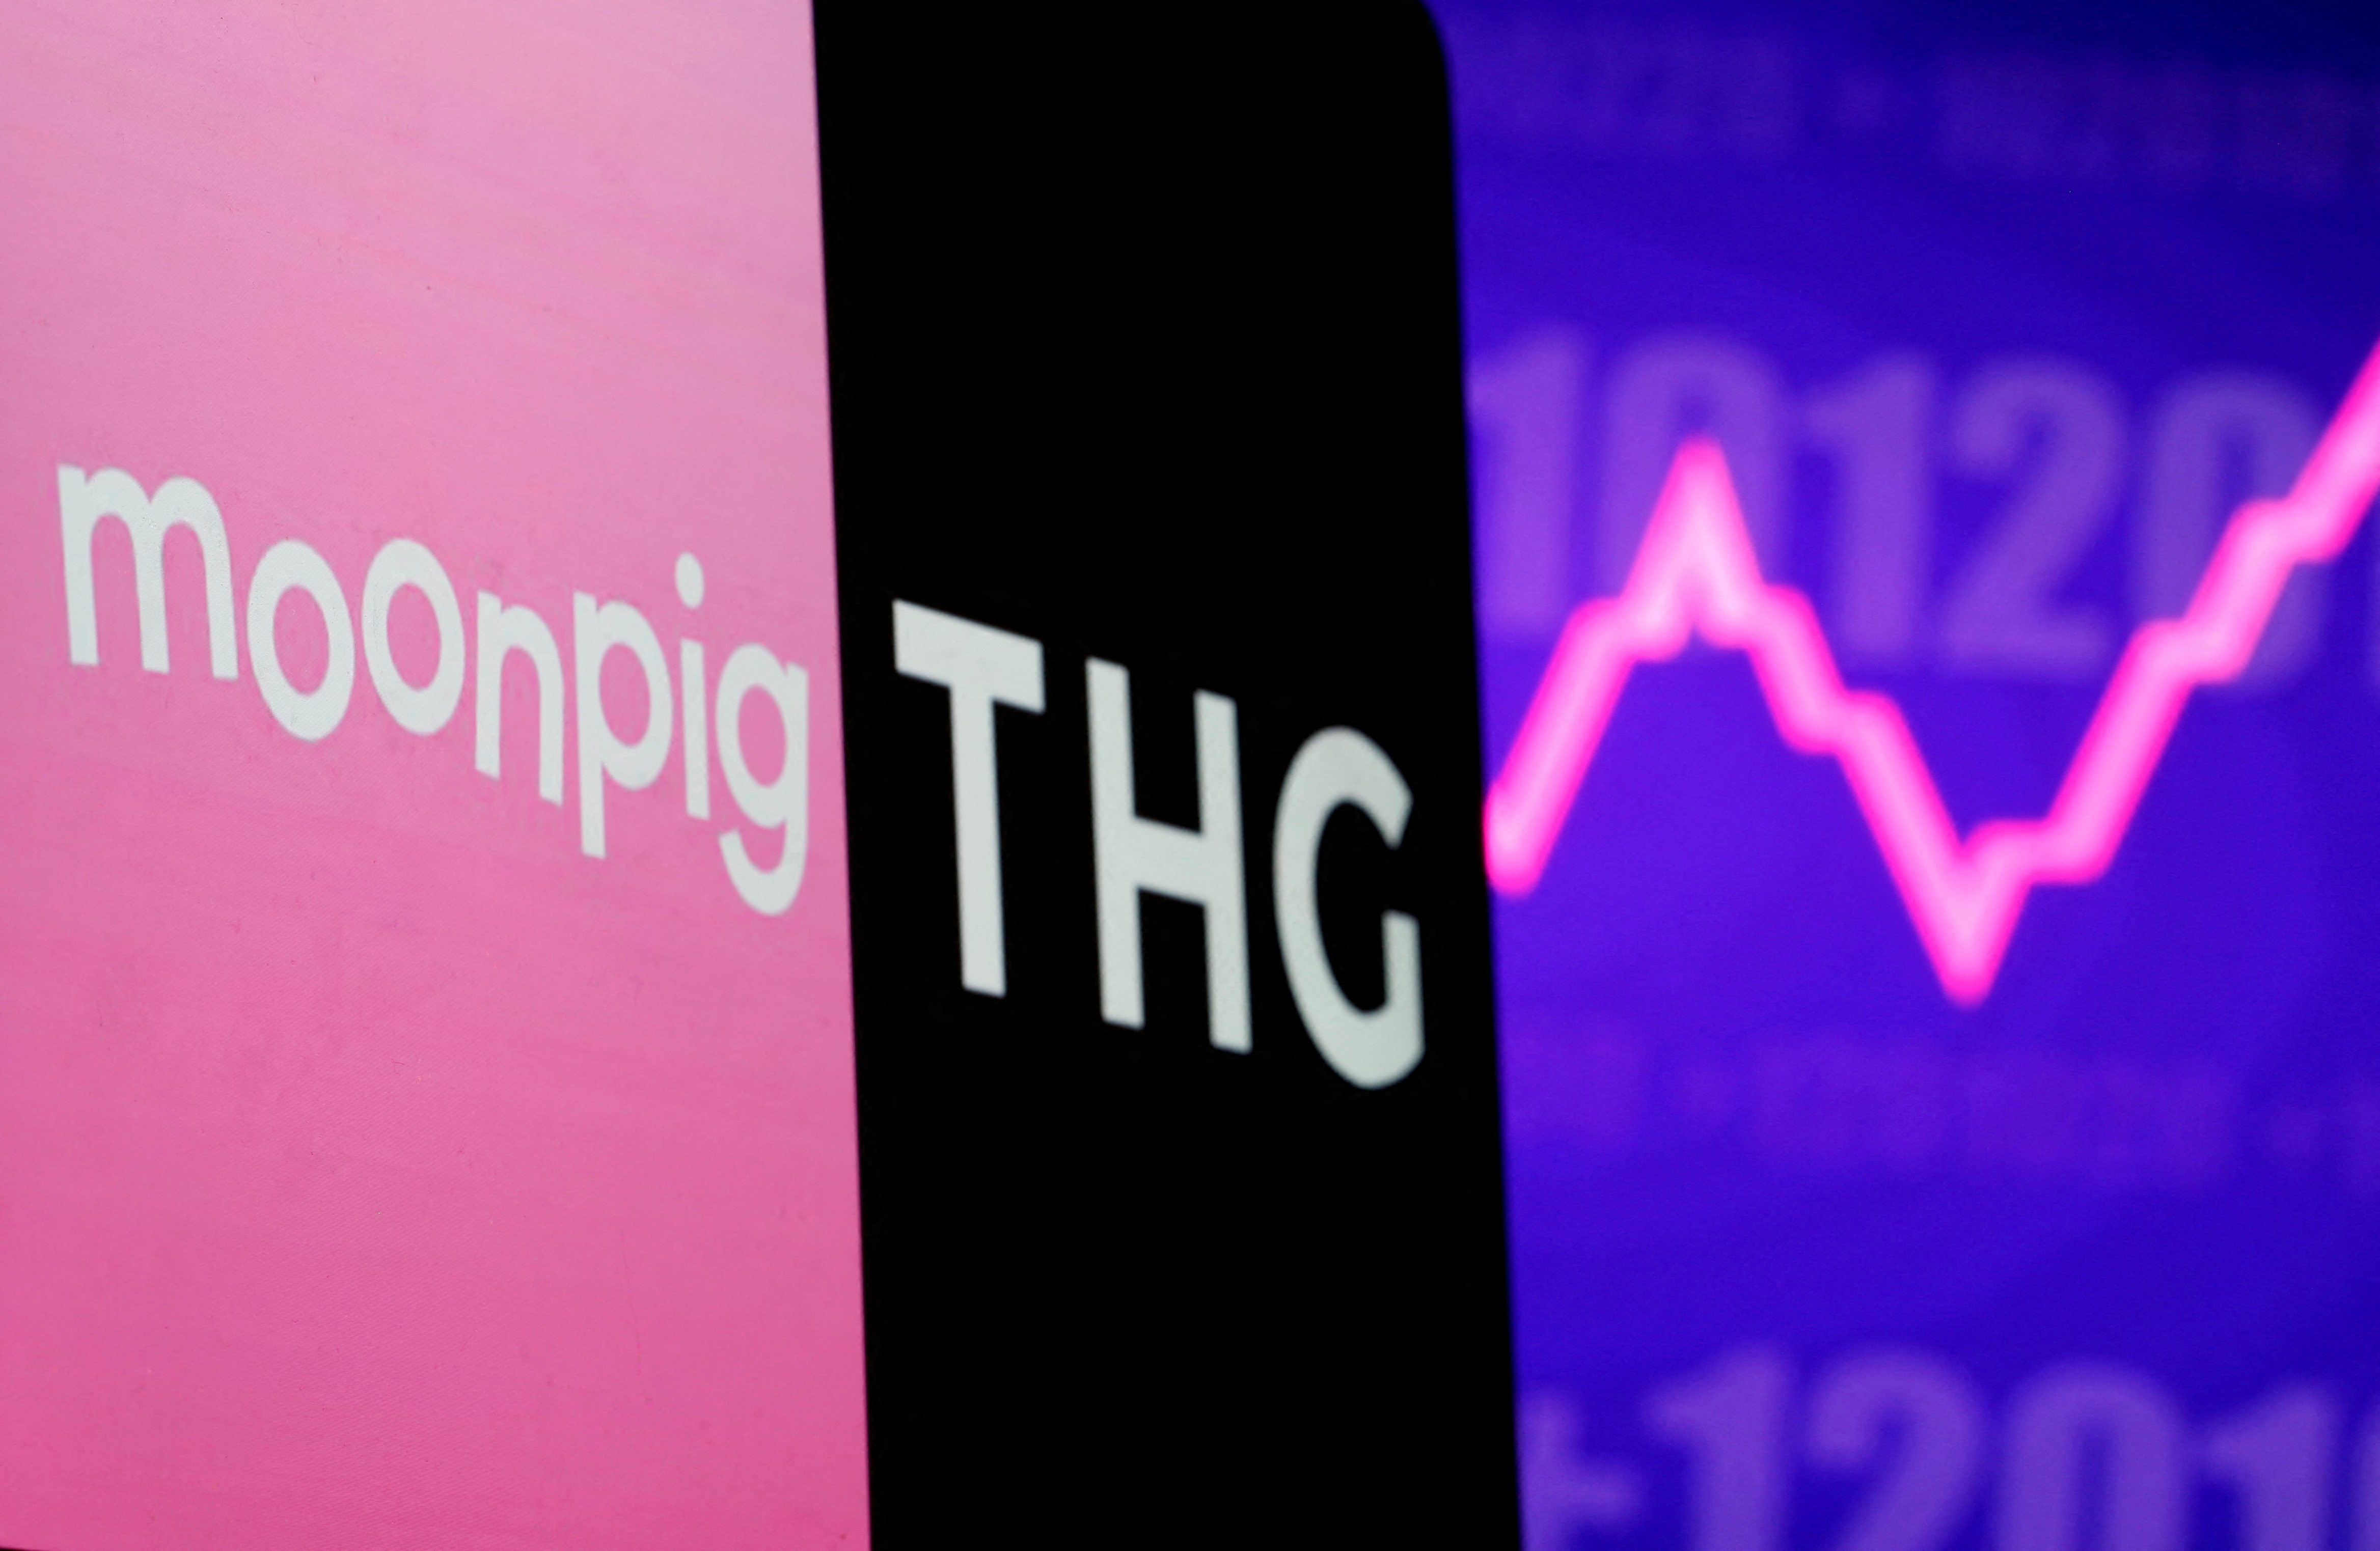 Moonpig and THG (The Hut Group) logos are seen on laptop in front of displayed stock graph in this illustration taken